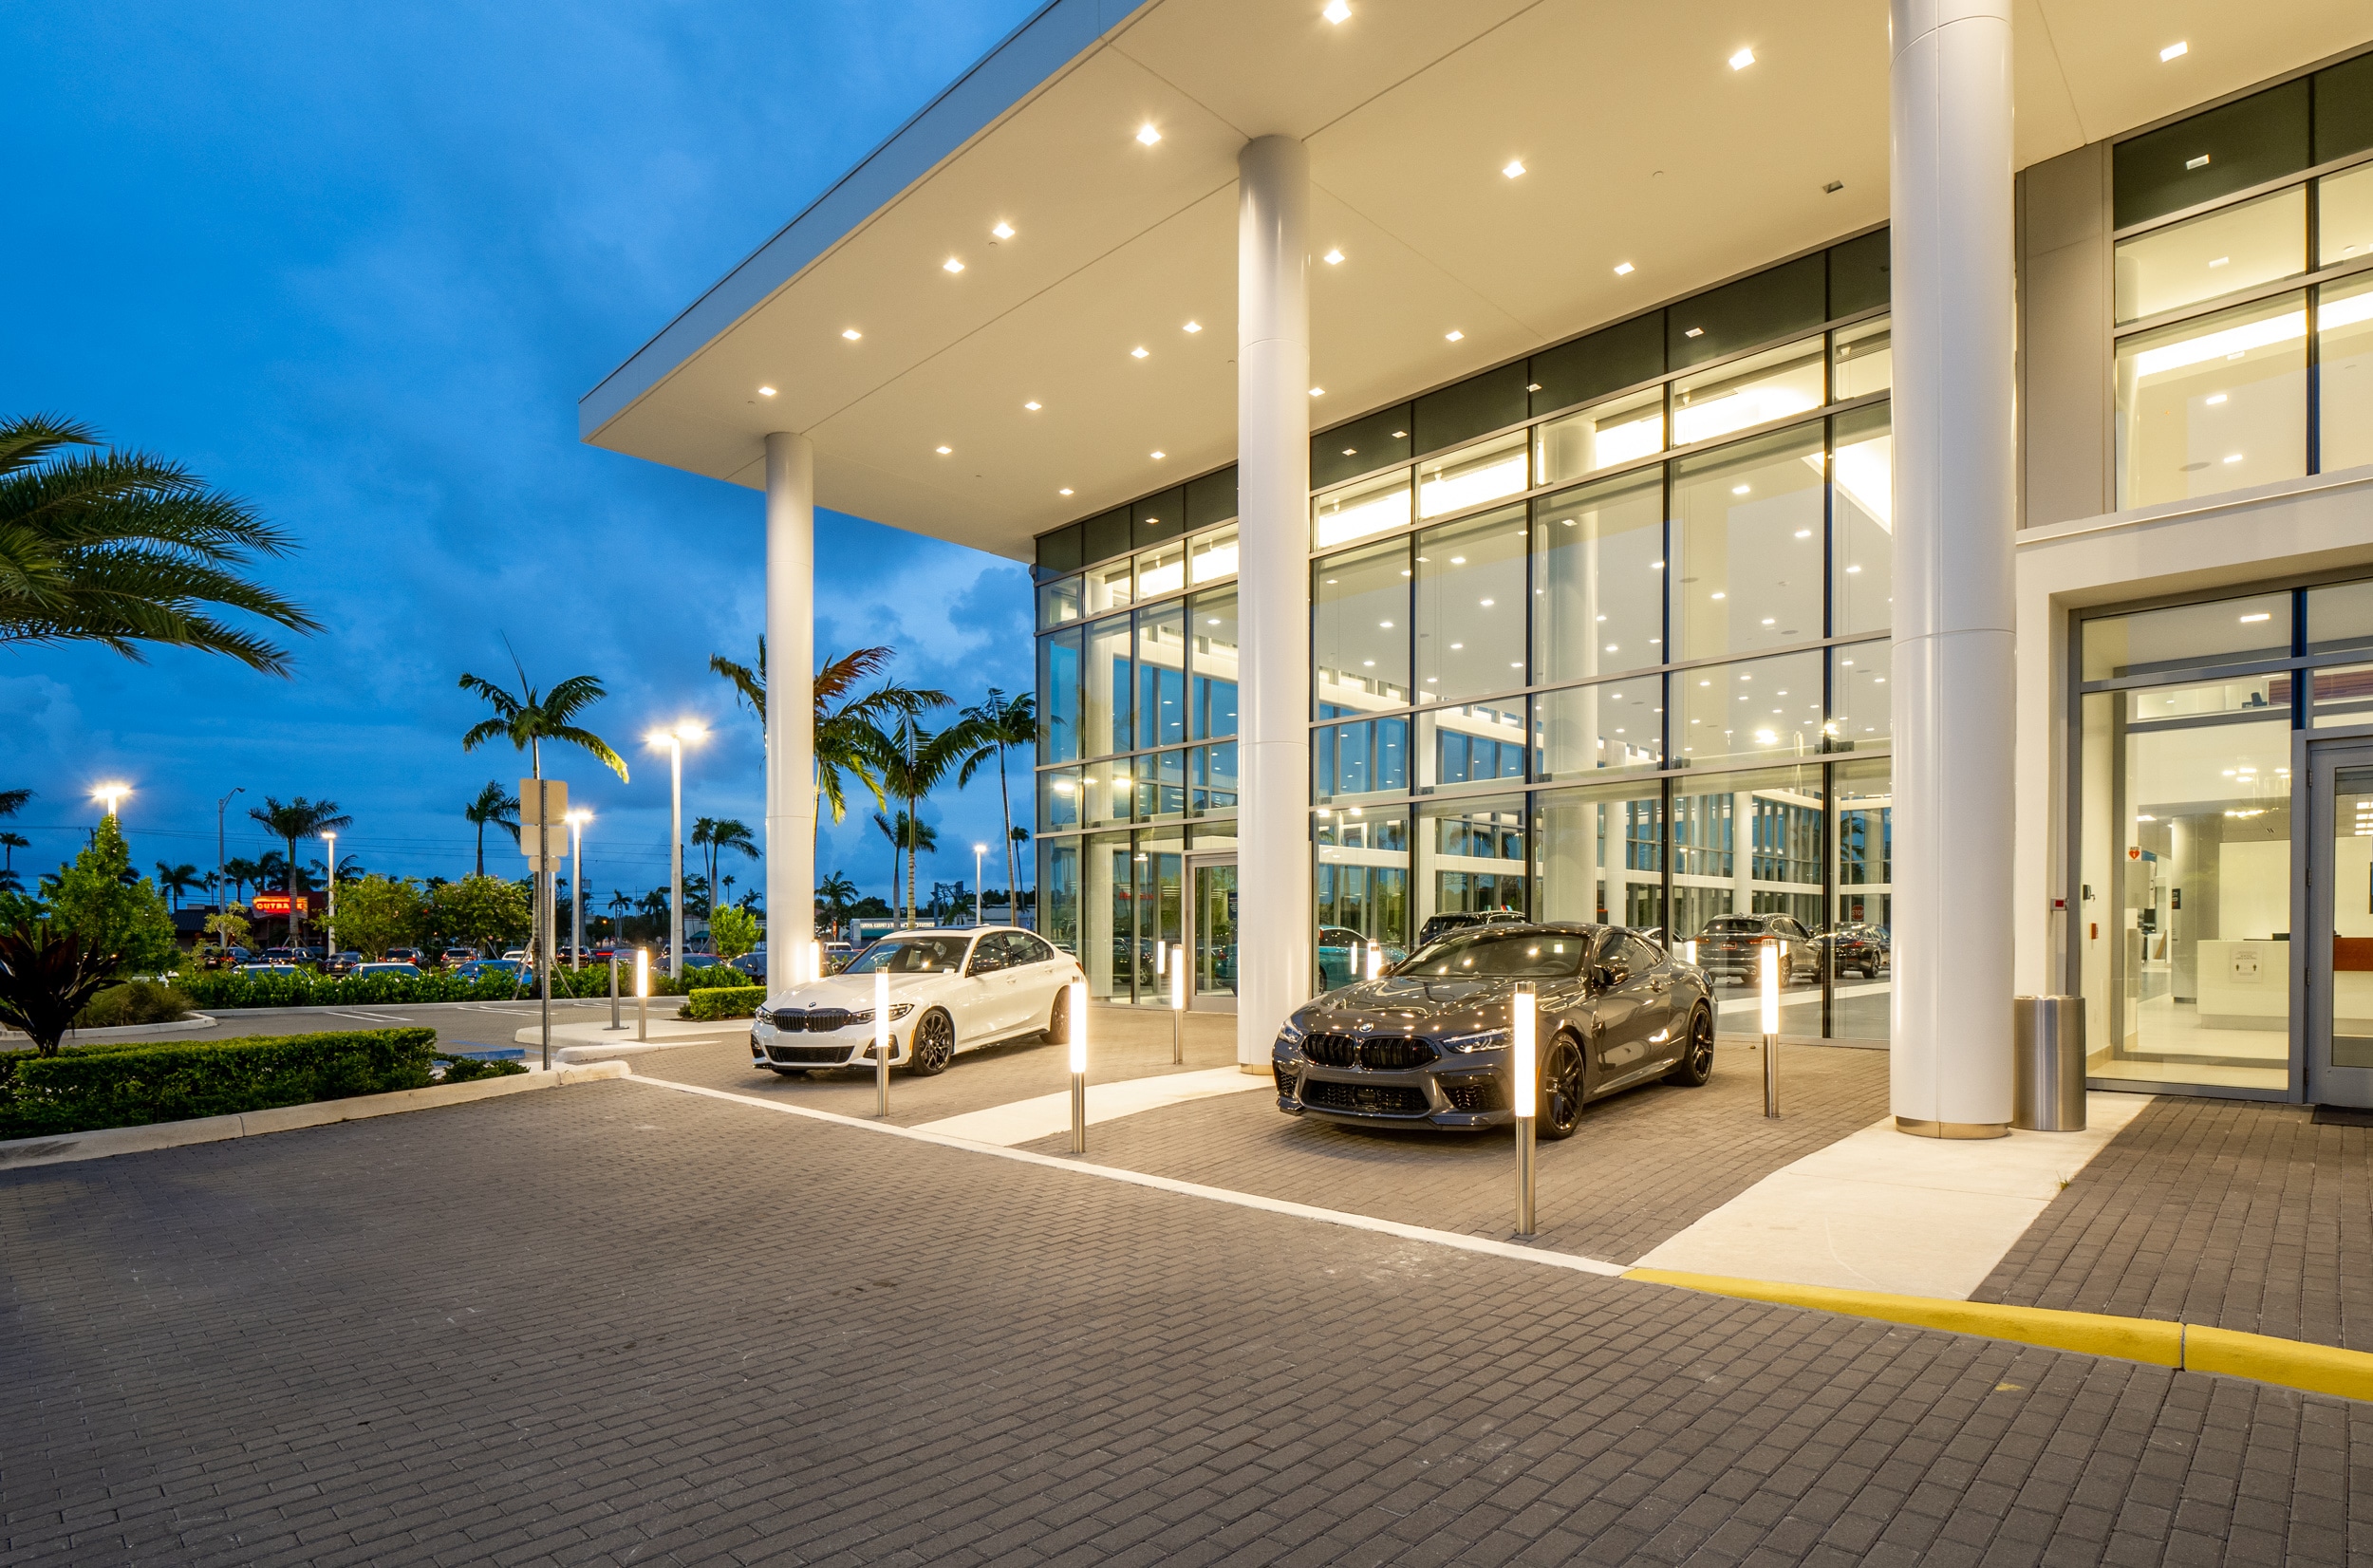 Exterior view of BMW of Delray Beach 
in the evening